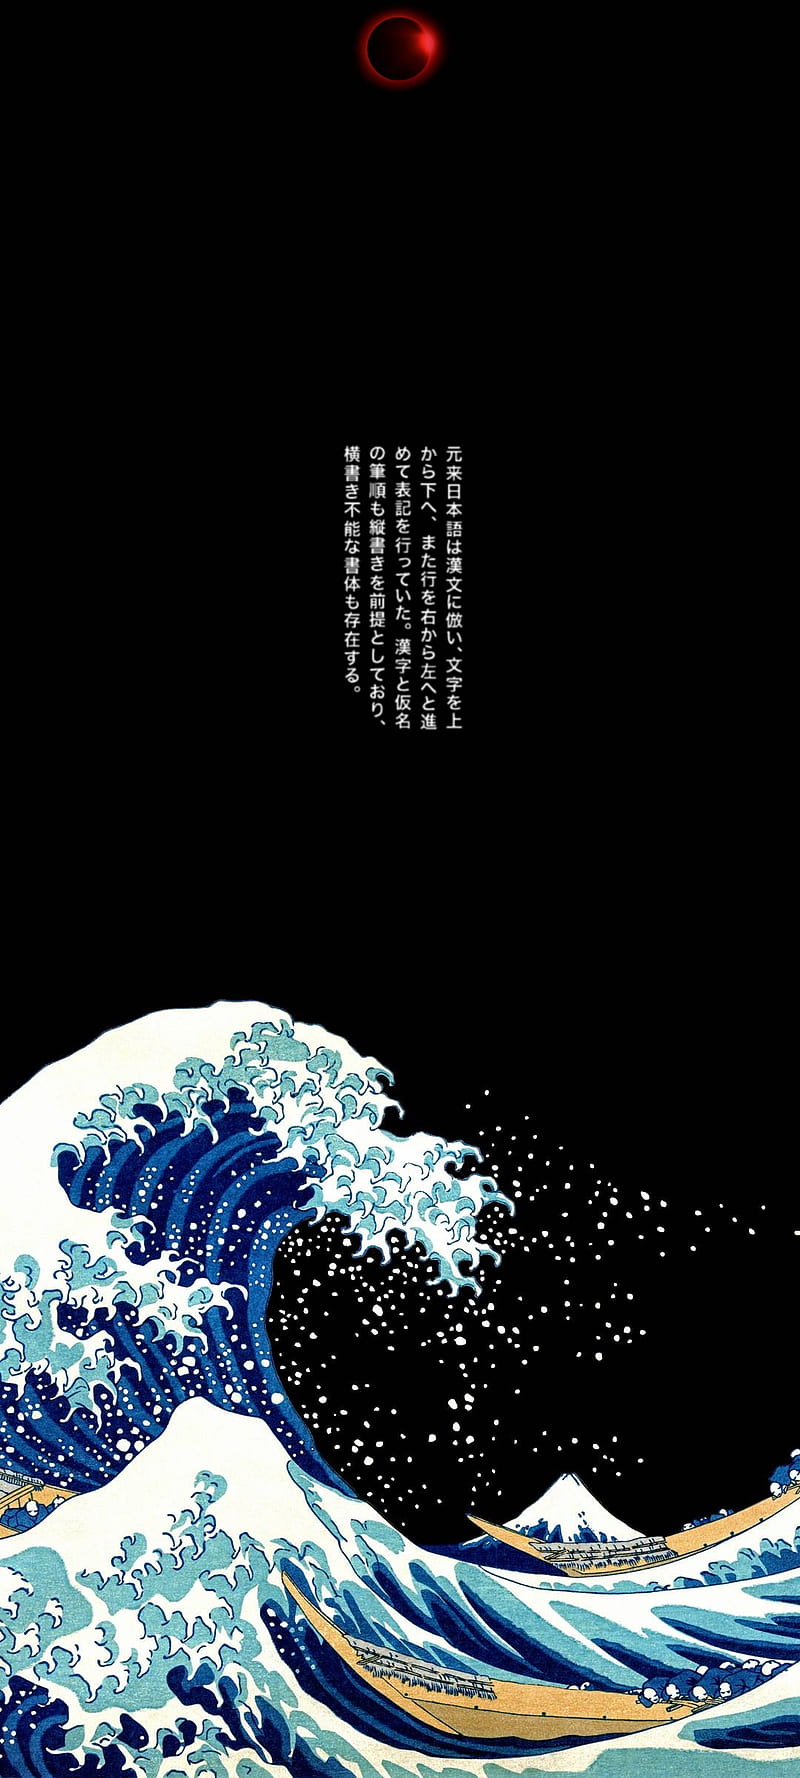 Artistic Minimalist Phone Wallpaper  Mobile Abyss